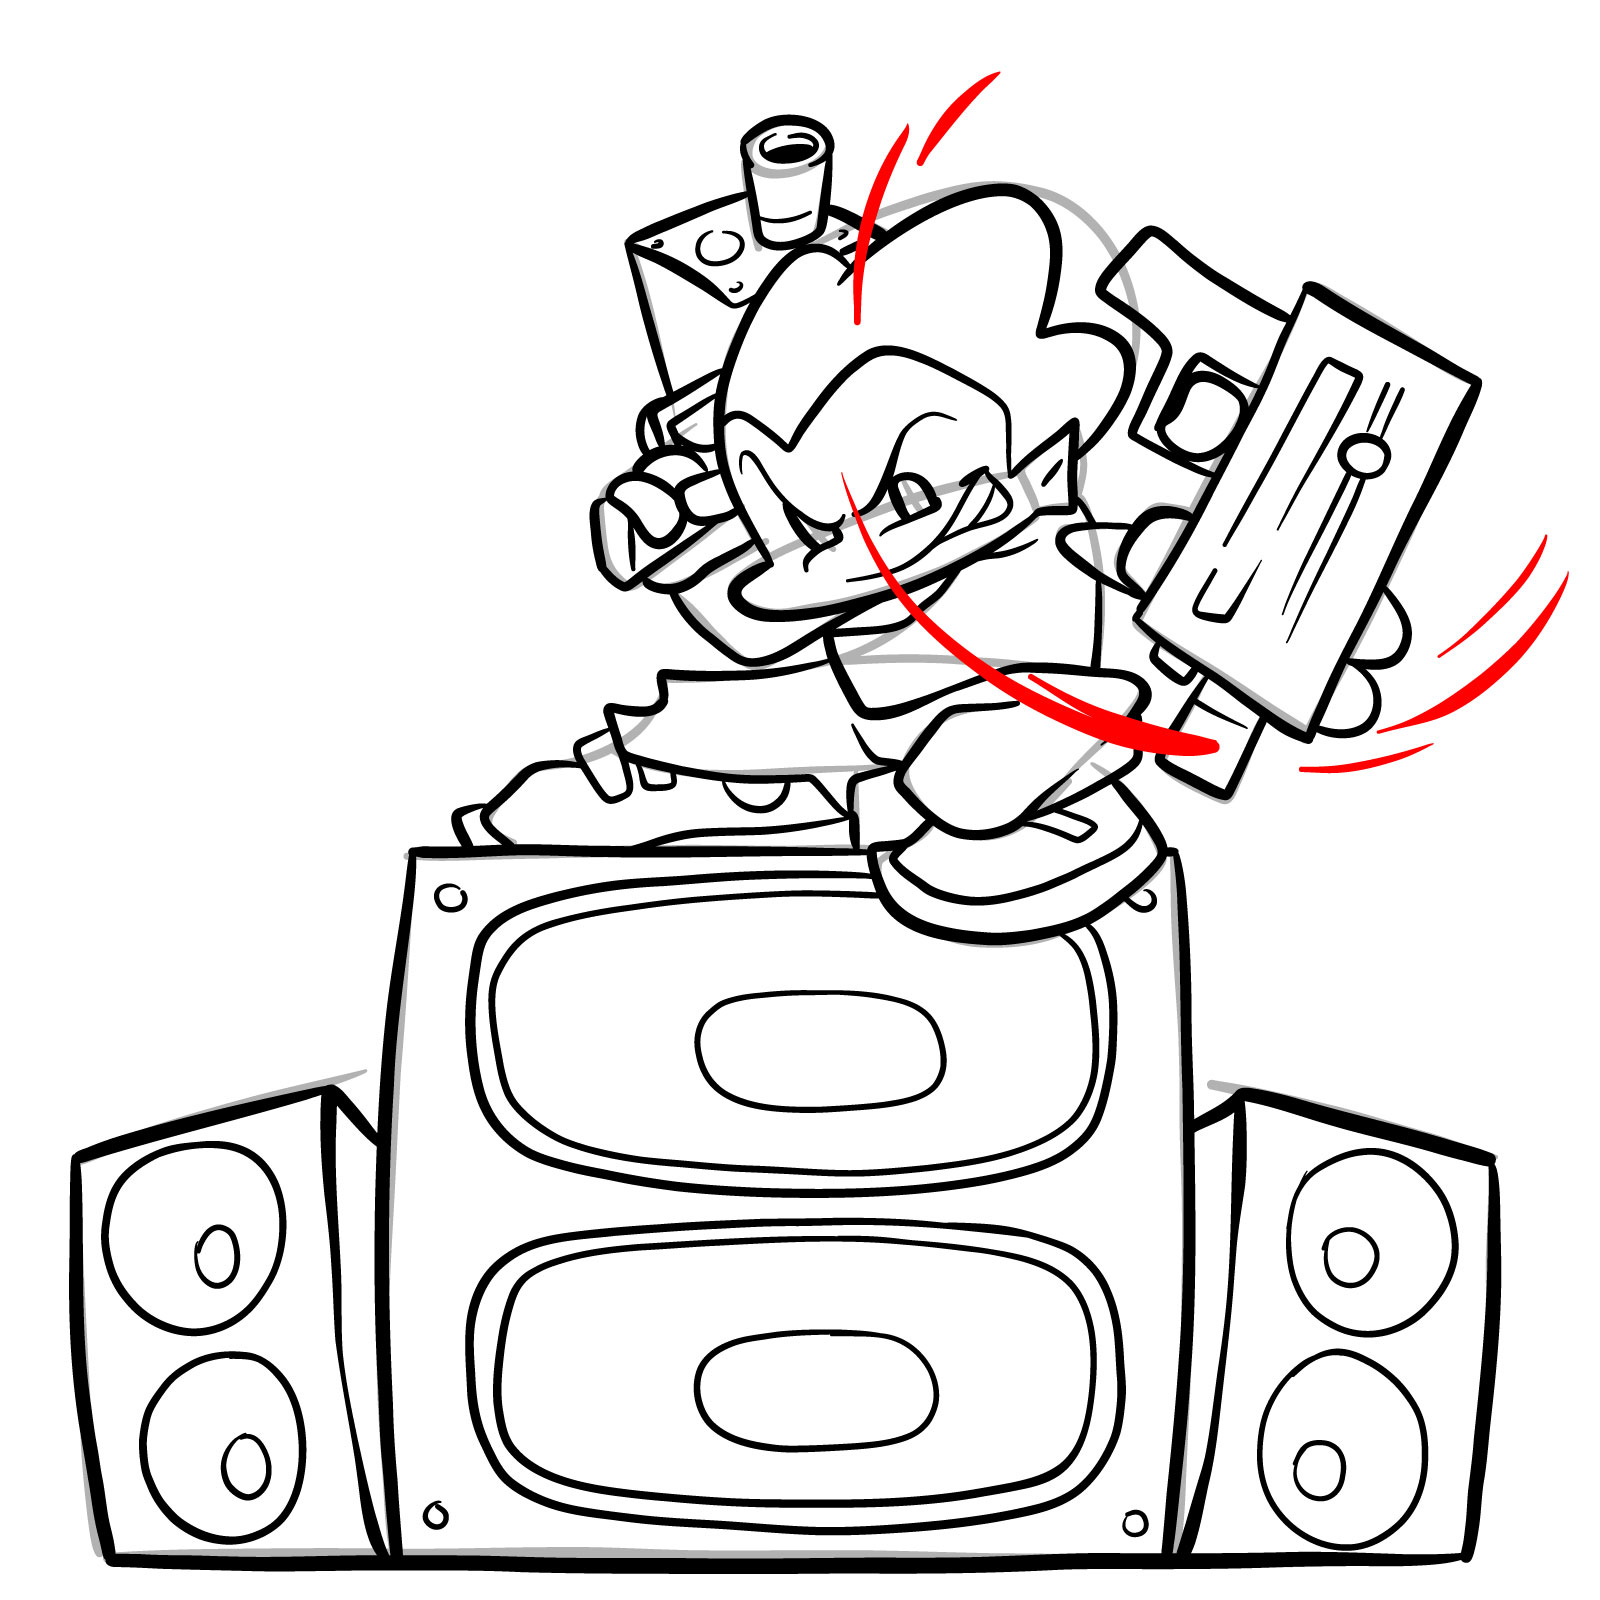 How to draw Pico on the speakers - step 30